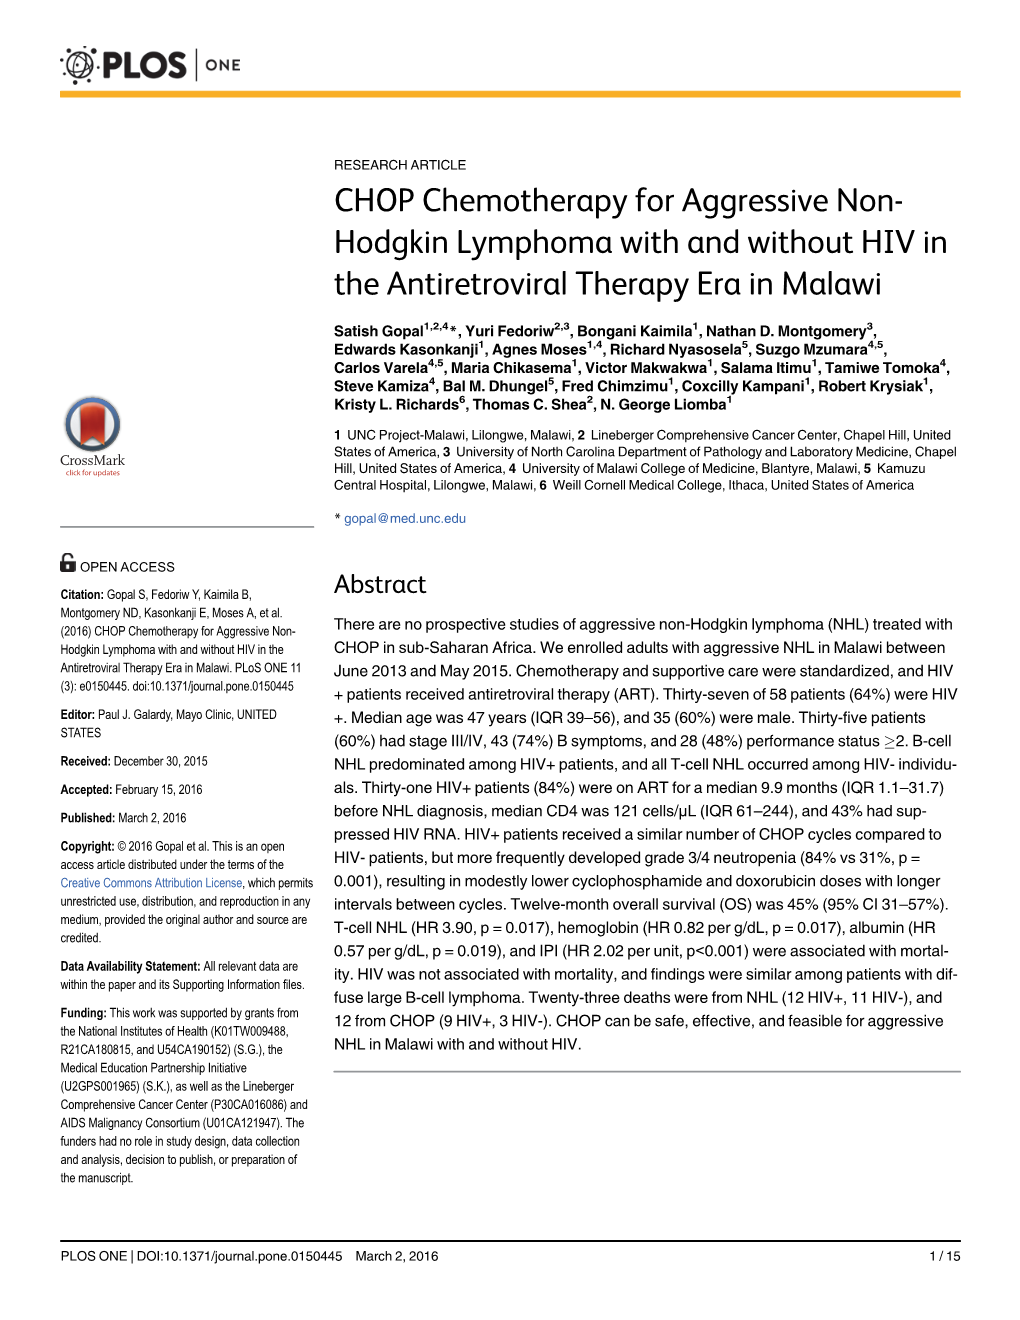 CHOP Chemotherapy for Aggressive Non-Hodgkin Lymphoma with and Without HIV in the Antiretroviral Therapy Era in Malawi